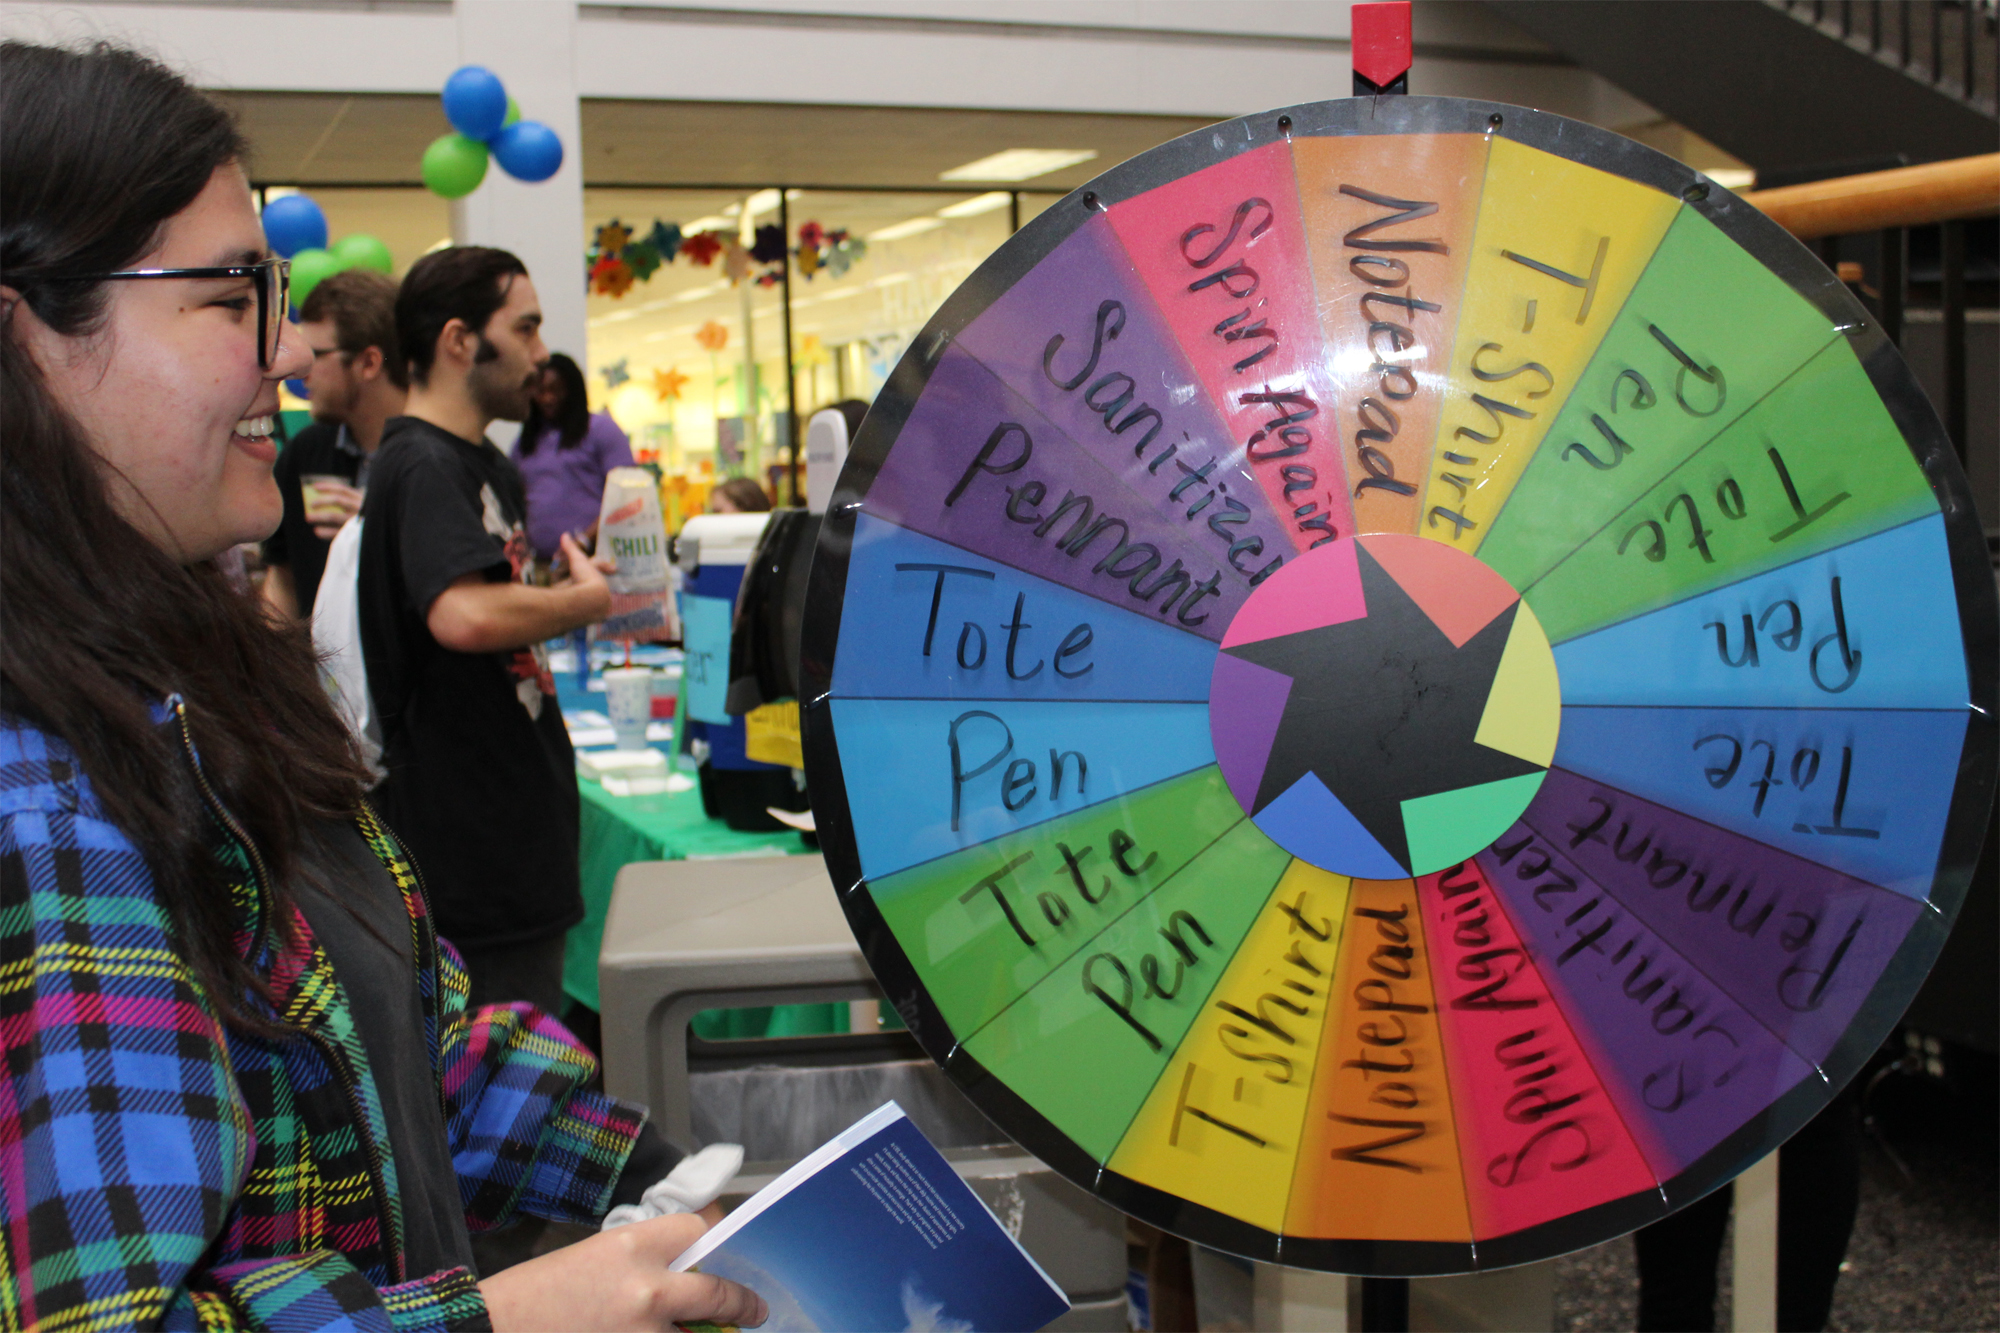 PHOTO: Student spins a game wheel to win a prize. Photo by: The Signal reporter Aimee Kubena.